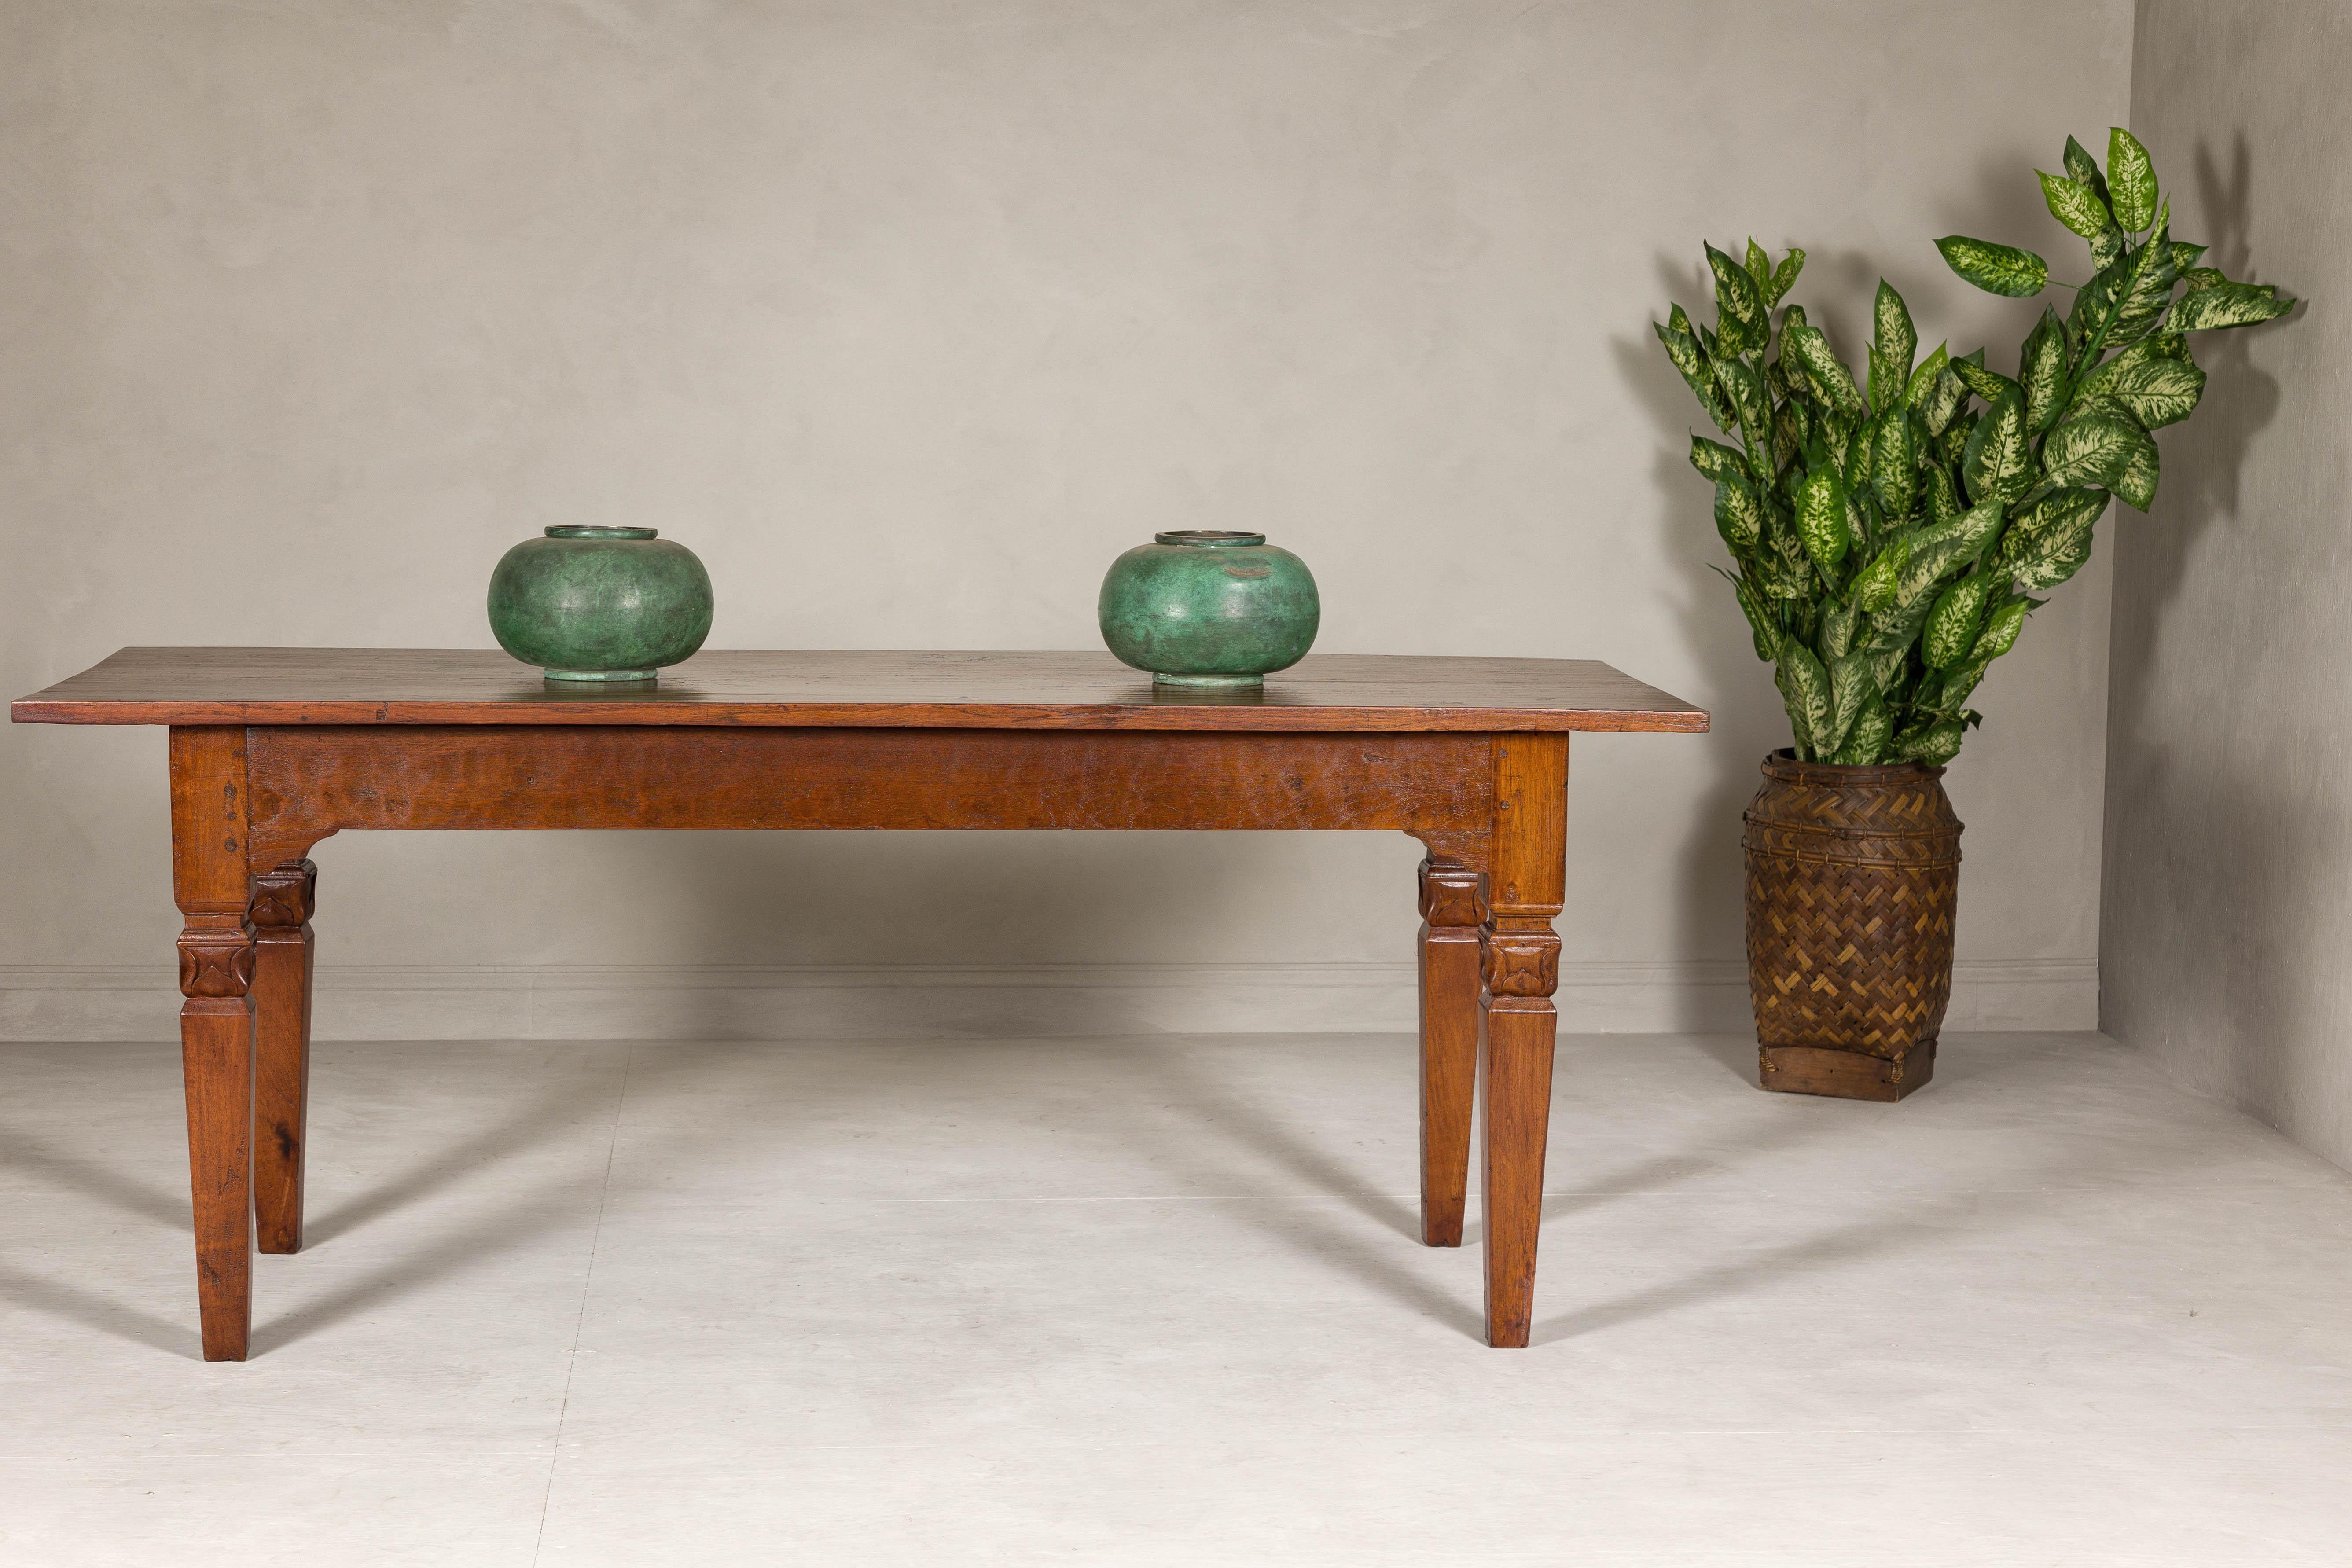 A wooden dining room table with carved lotiform capitals sitting atop the legs and custom finish with satin patina. This vintage wooden dining table, elegantly restored to its former glory, makes an exquisite addition to any dining room with its